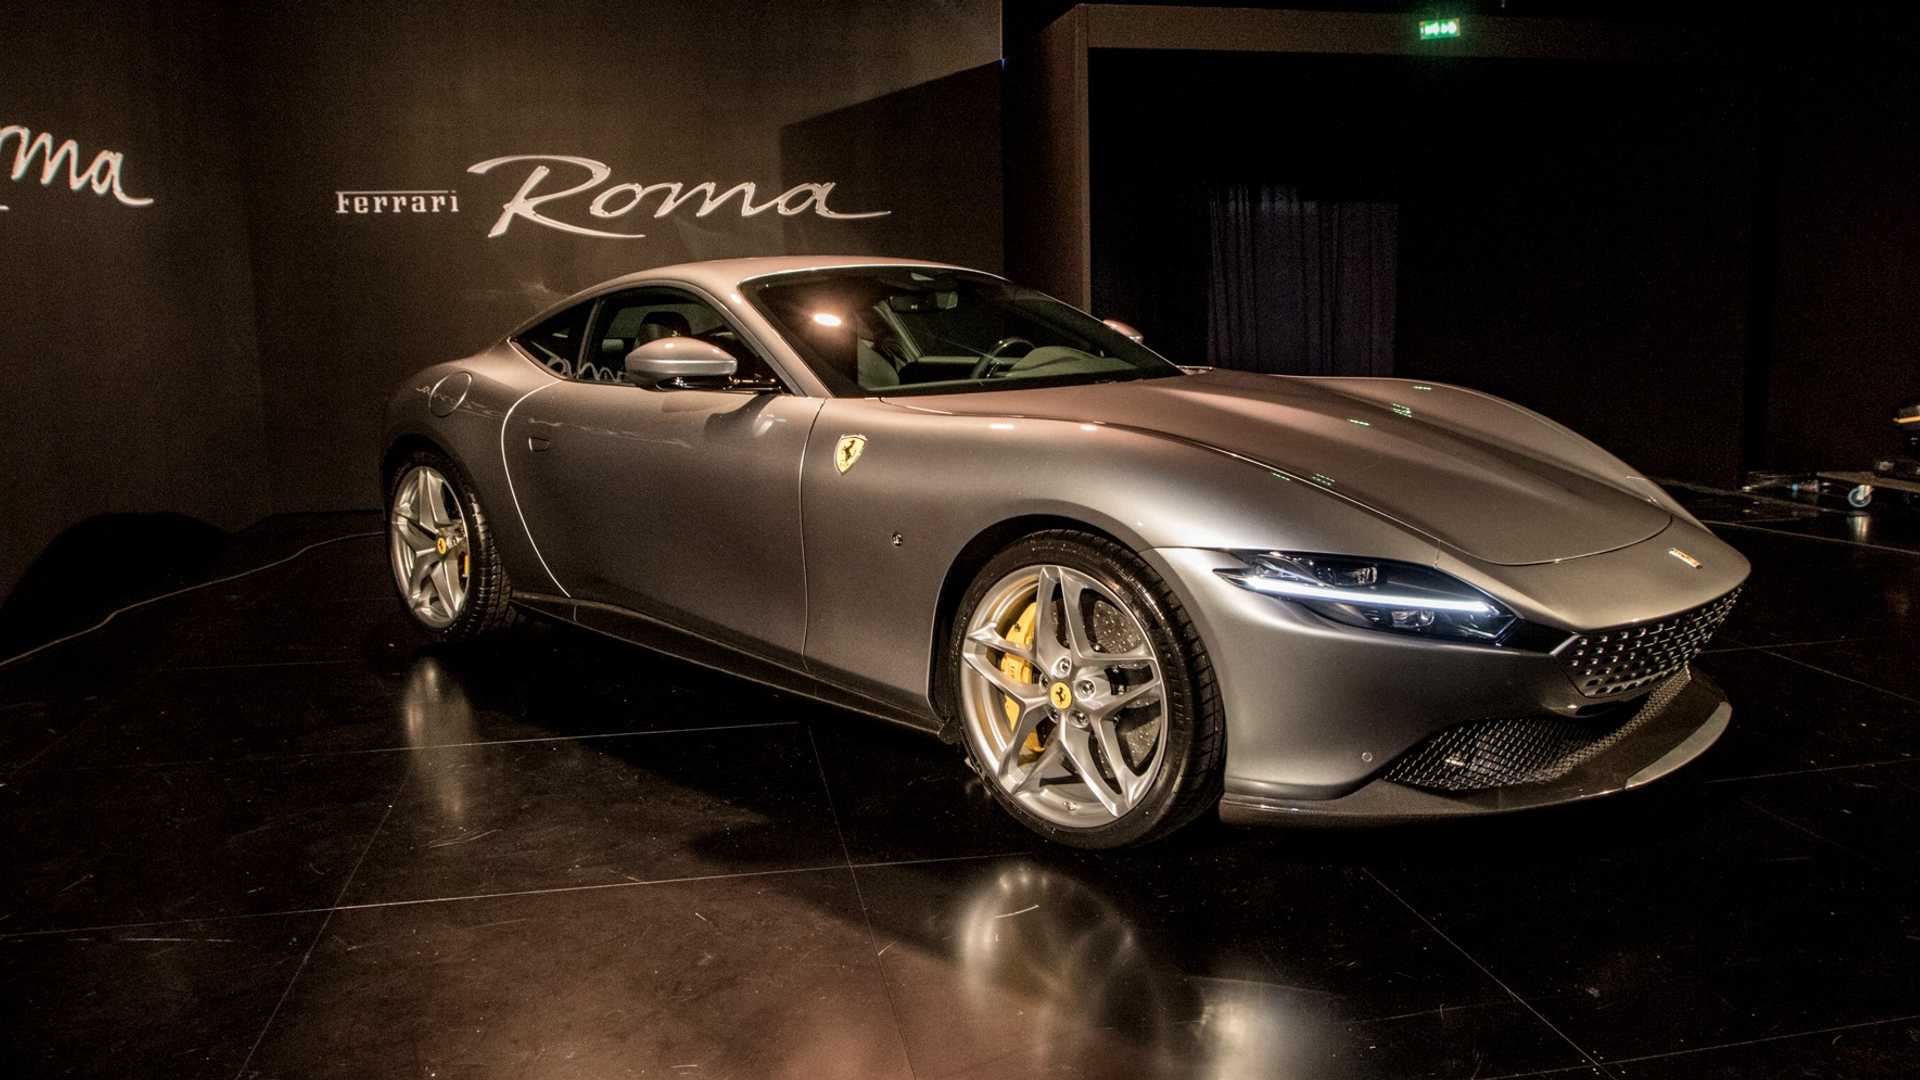 Ferrari Roma Shows Off Its Sleek Styling In Live Photo From Premiere